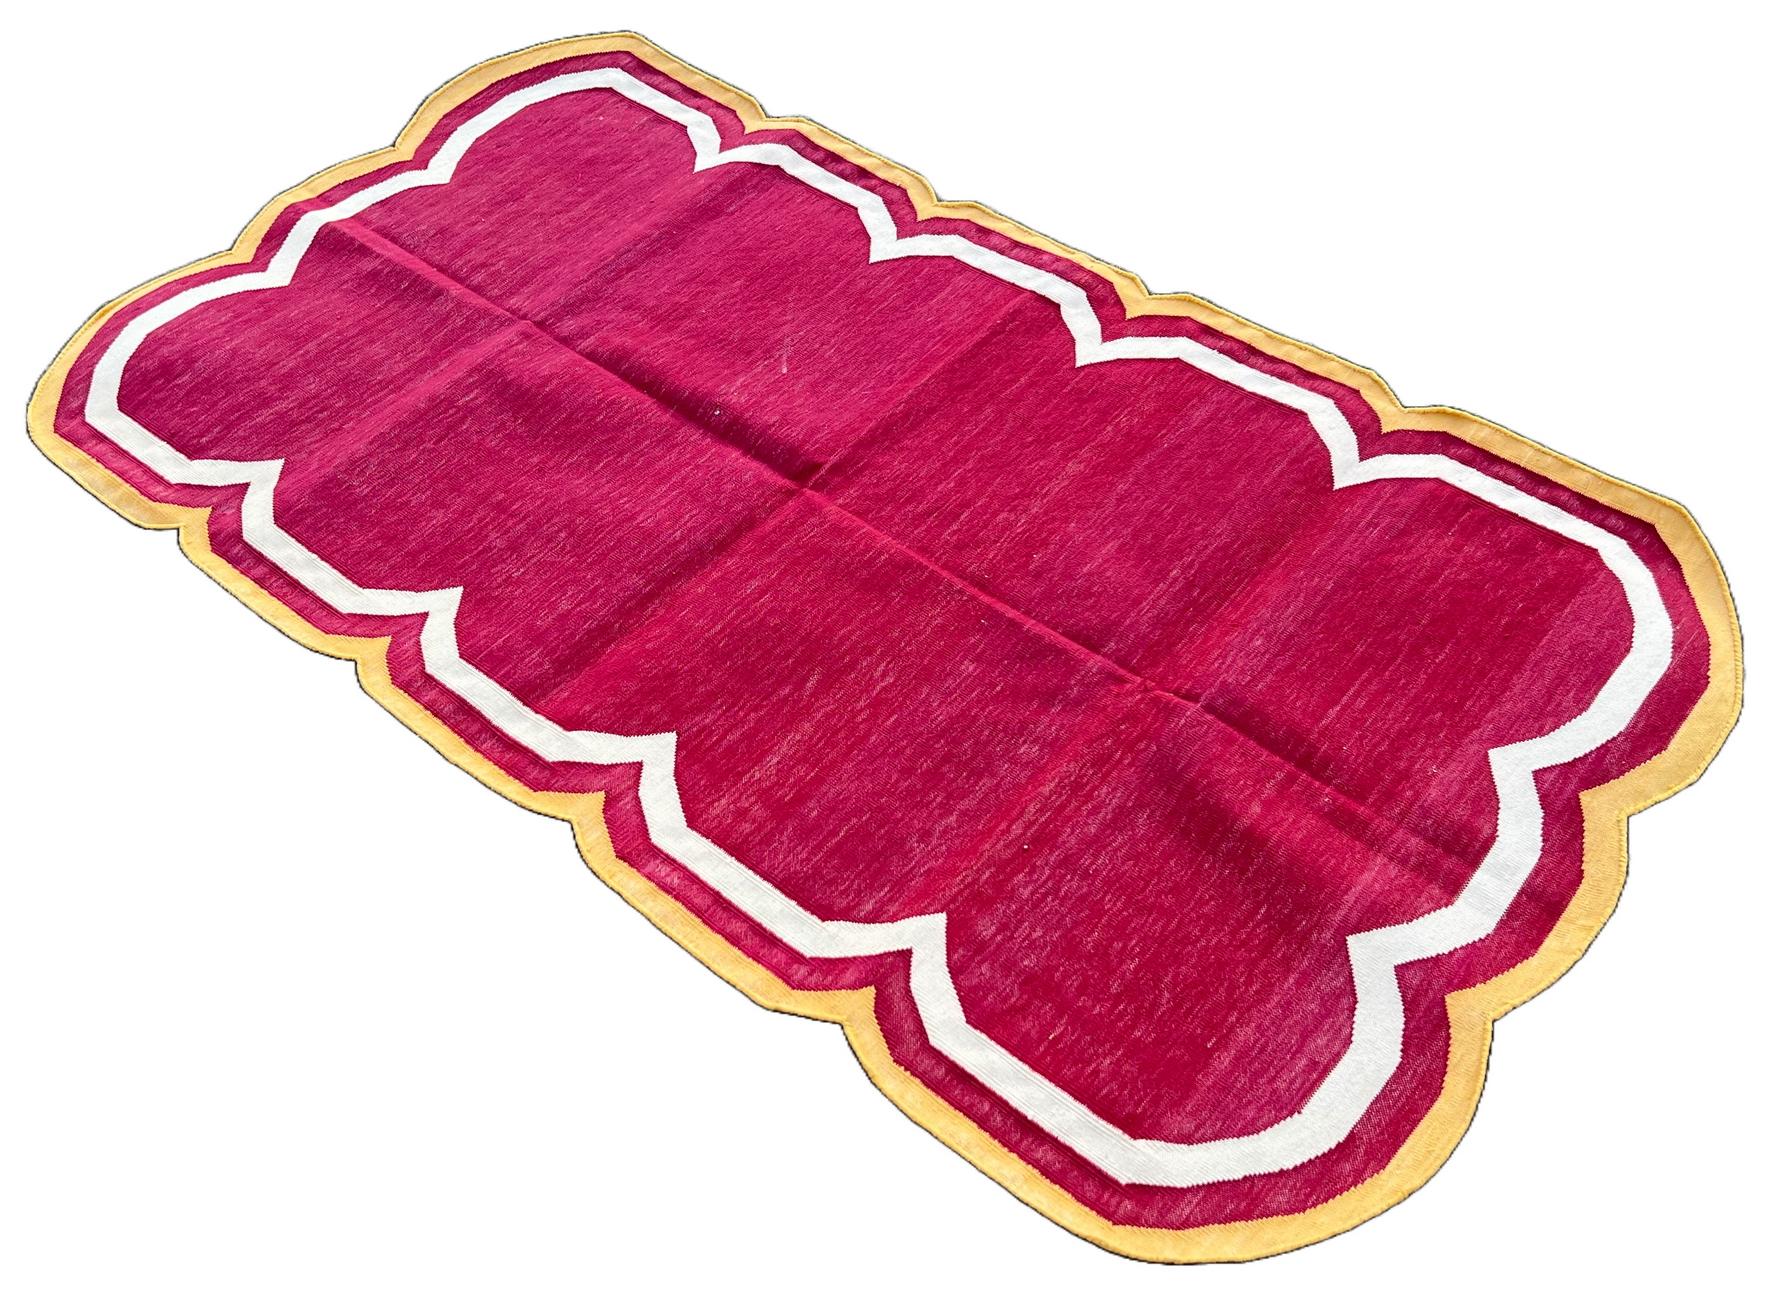 Cotton Vegetable Dyed Raspberry Pink, Cream And Yellow Four Sided Scalloped Rug-3'x5' 
(Scallops runs on all Four Sides)
These special flat-weave dhurries are hand-woven with 15 ply 100% cotton yarn. Due to the special manufacturing techniques used